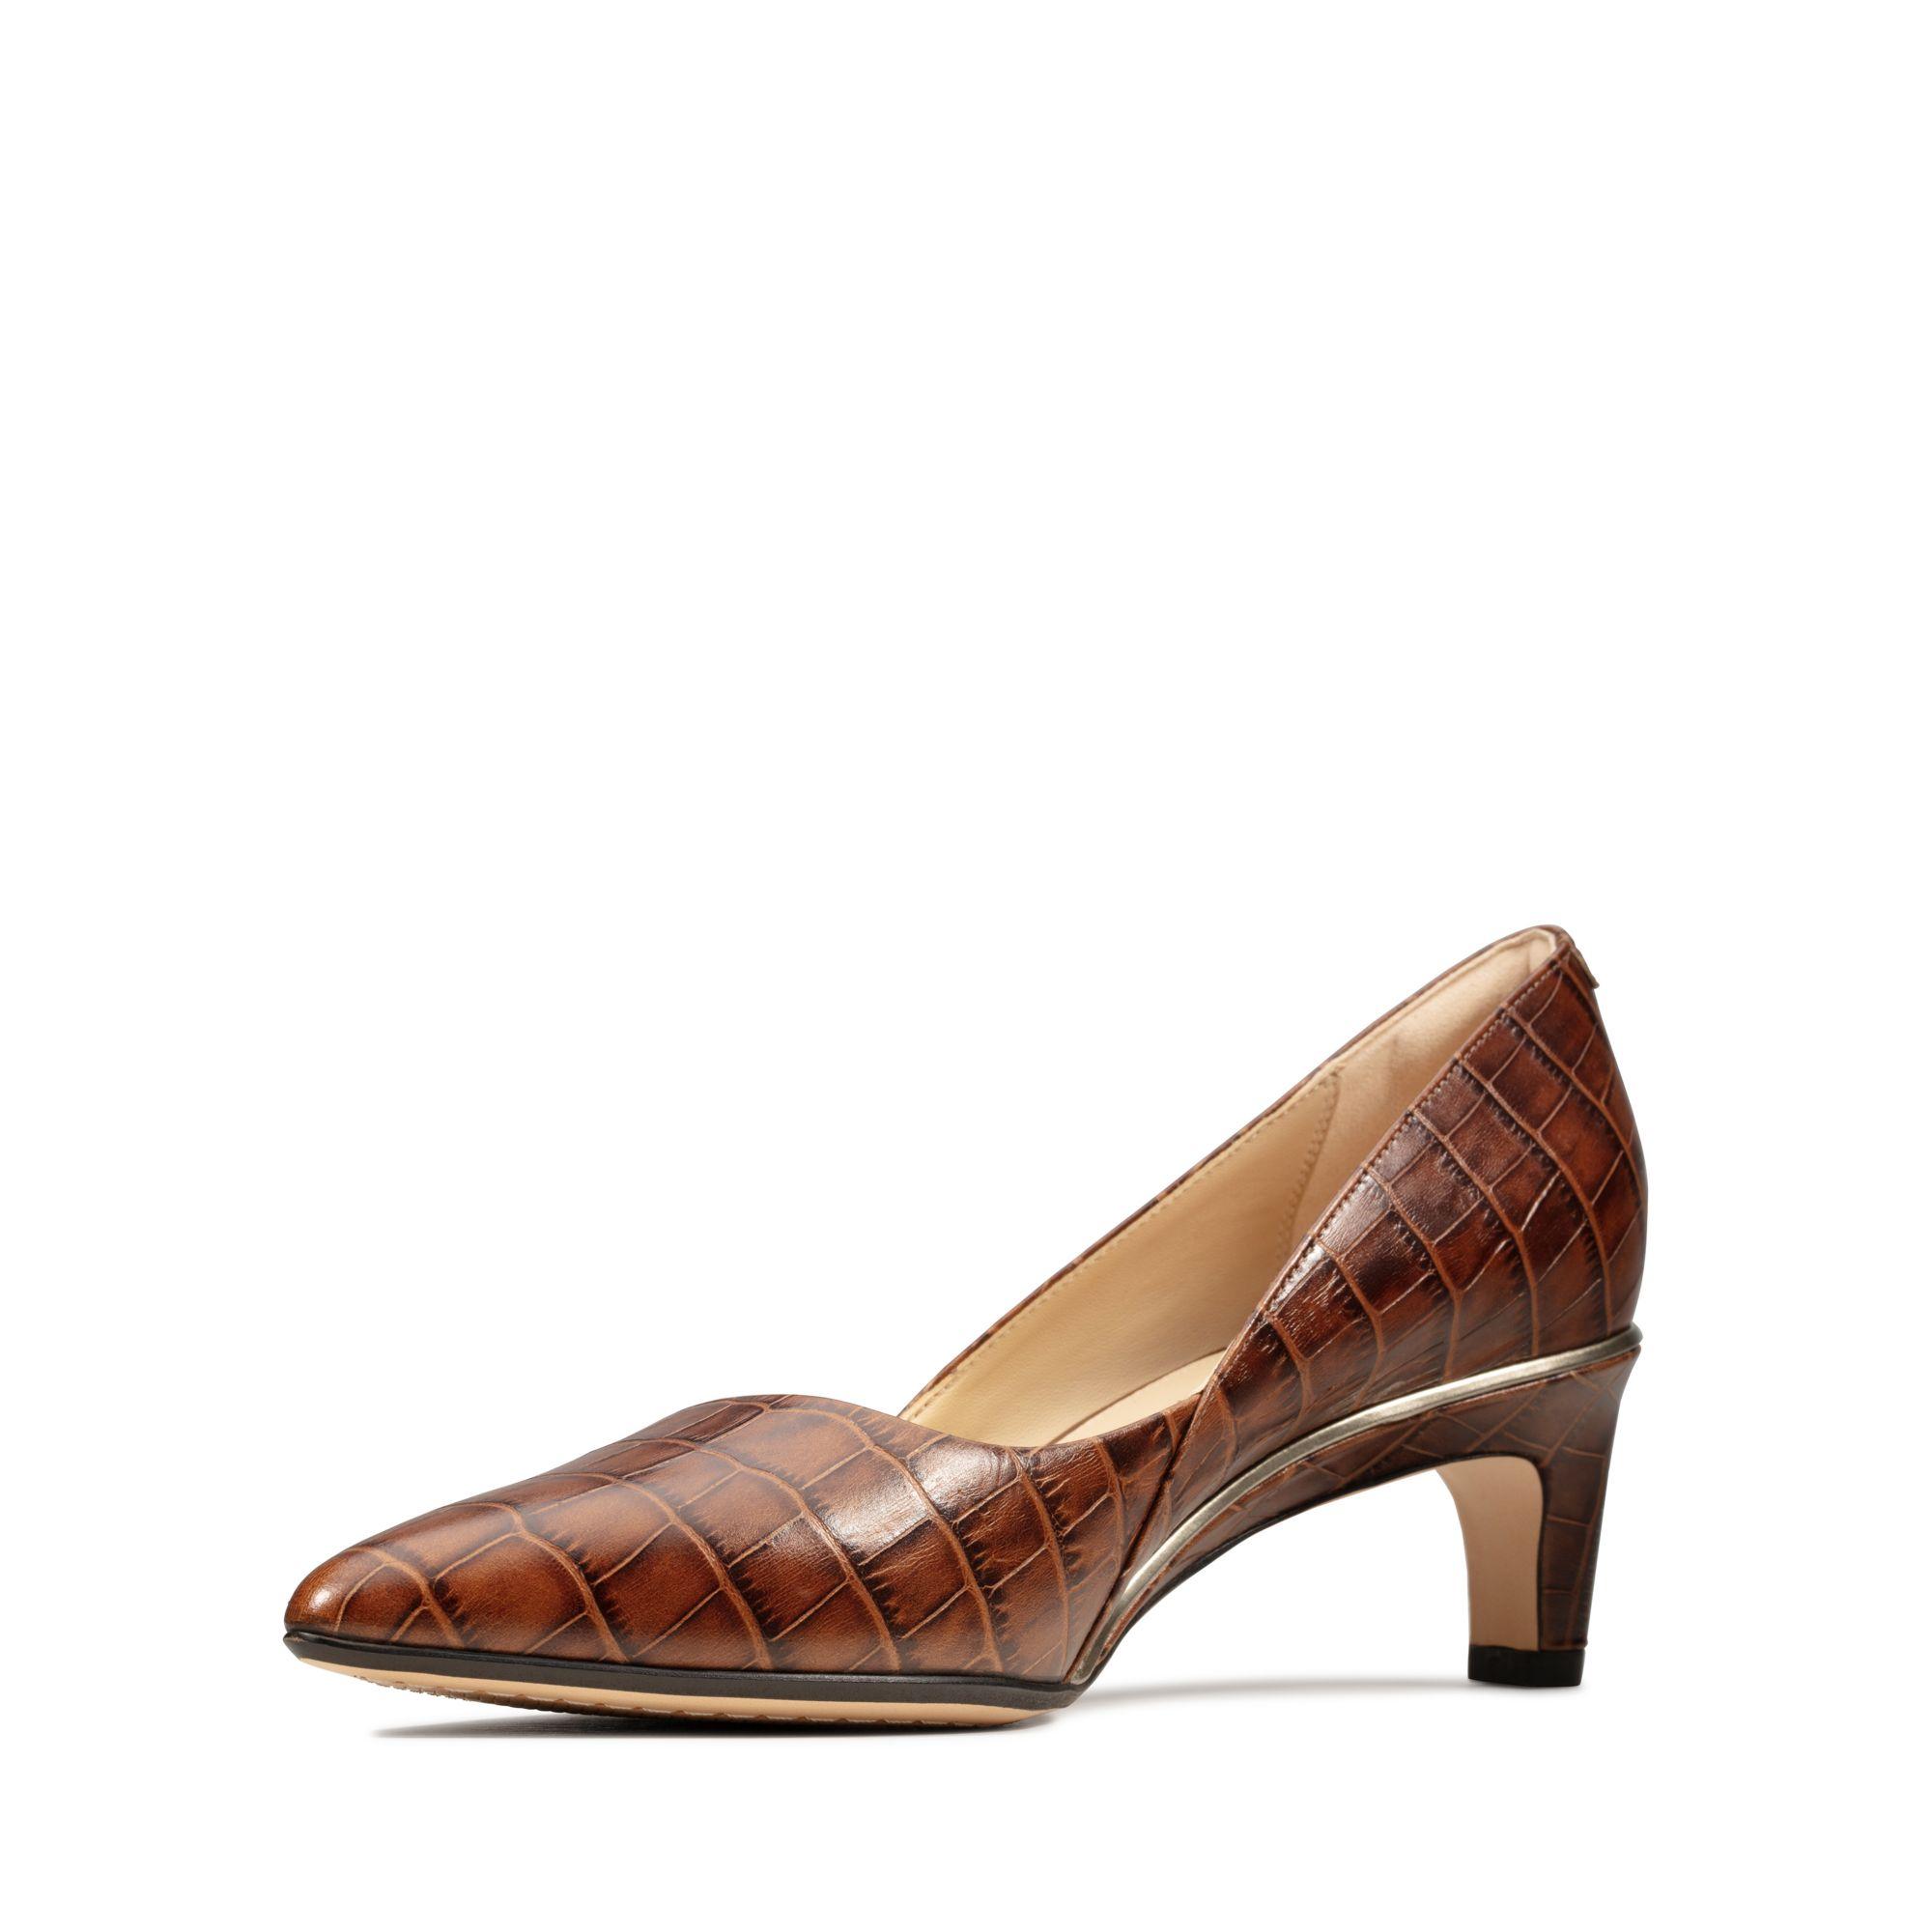 Clarks Leather Ellis Rose in Tan Leather (Brown) - Lyst